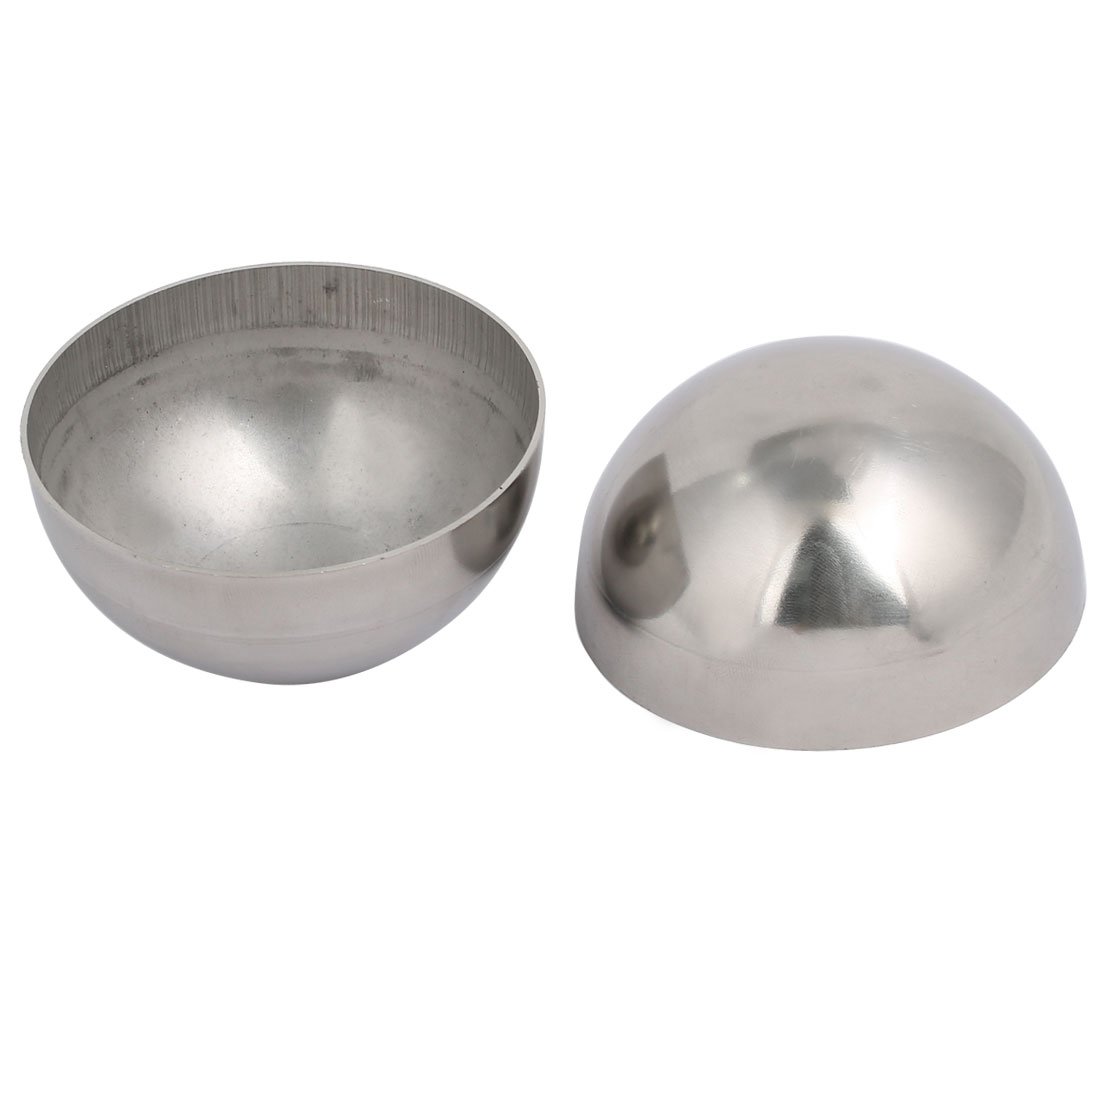 Stainless Steel Half Ball Manufacturers, Suppliers, Importers, Dealers in Mumbai India